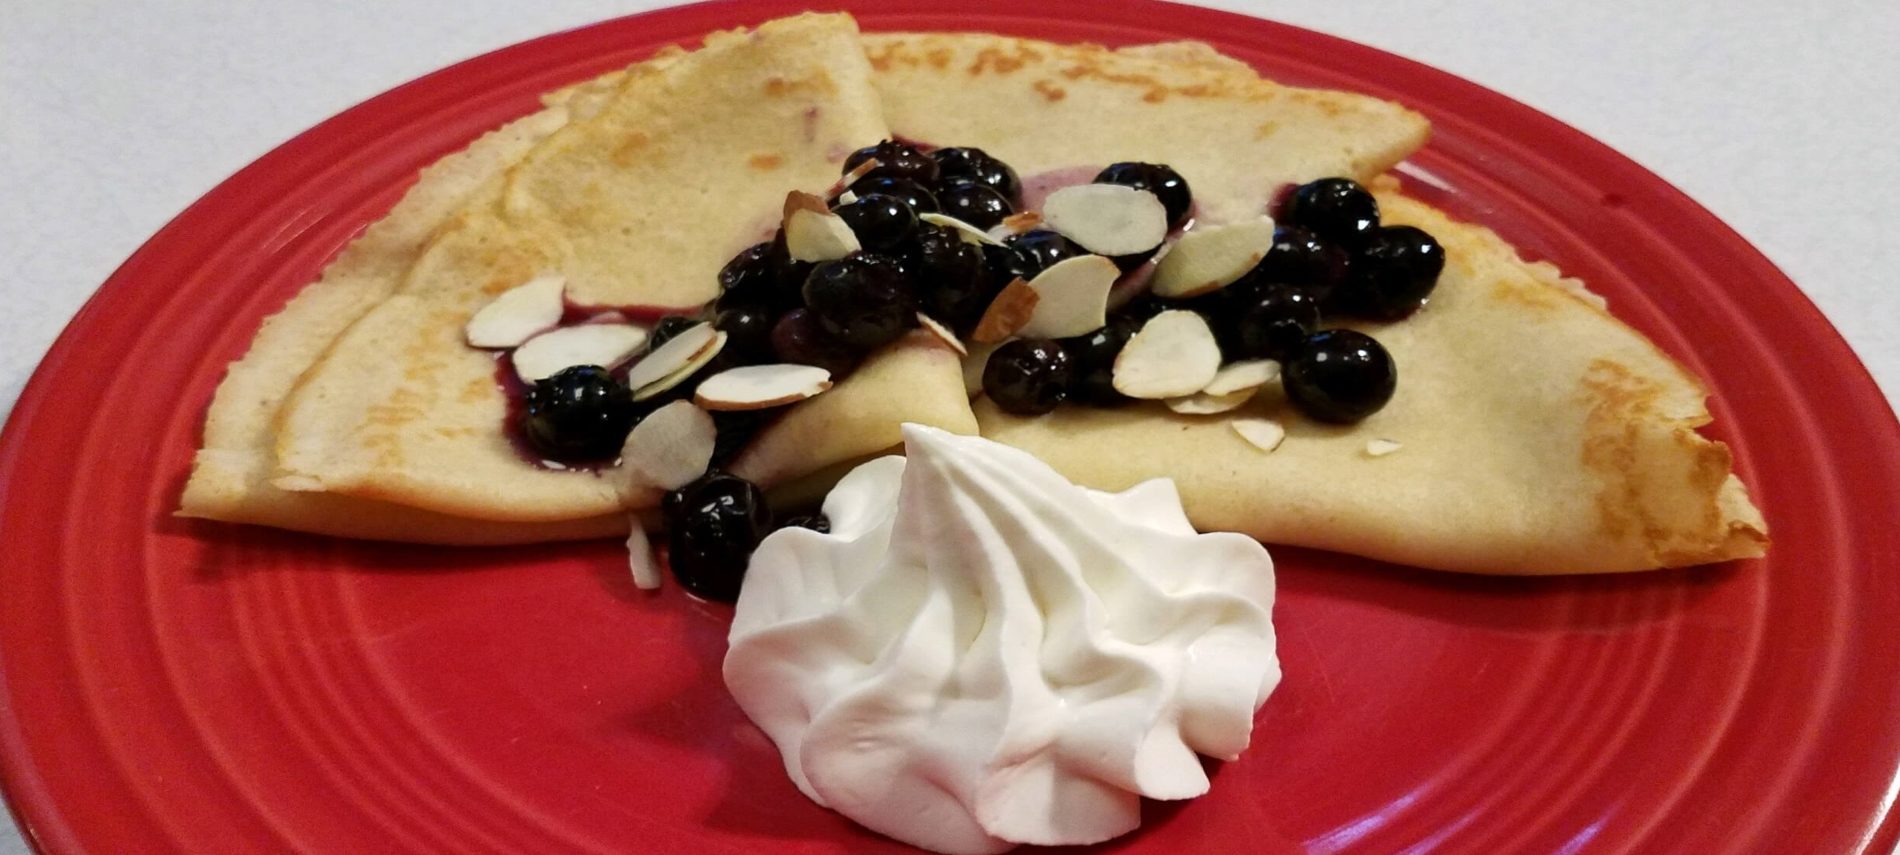 Three swedish pancakes lightly browned folded into triangles, topped with blueberries and side of whipped cream on a red plate